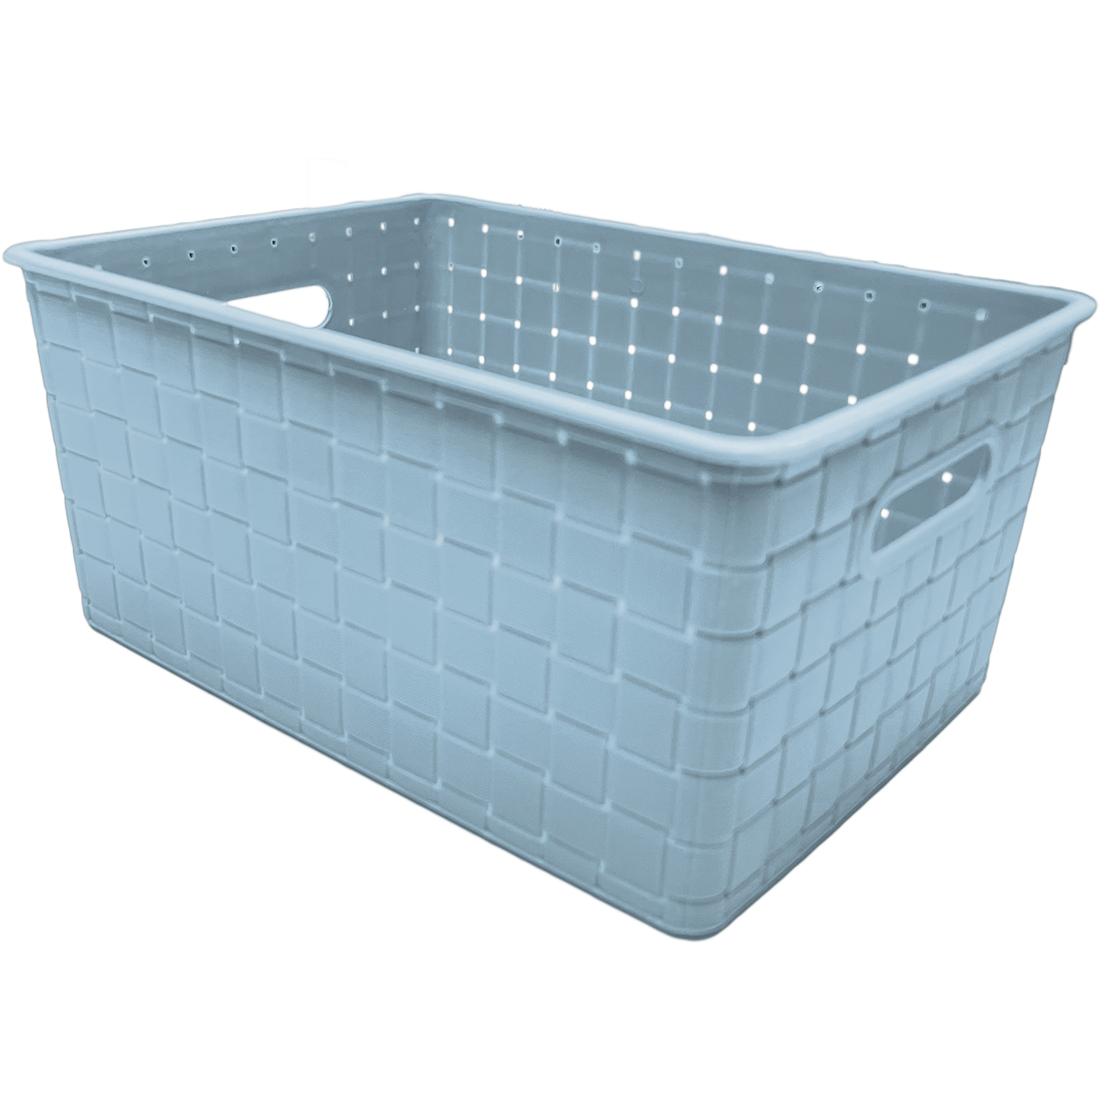 3 Pack Woven Plastic Storage Basket - Sky Blue Checkered